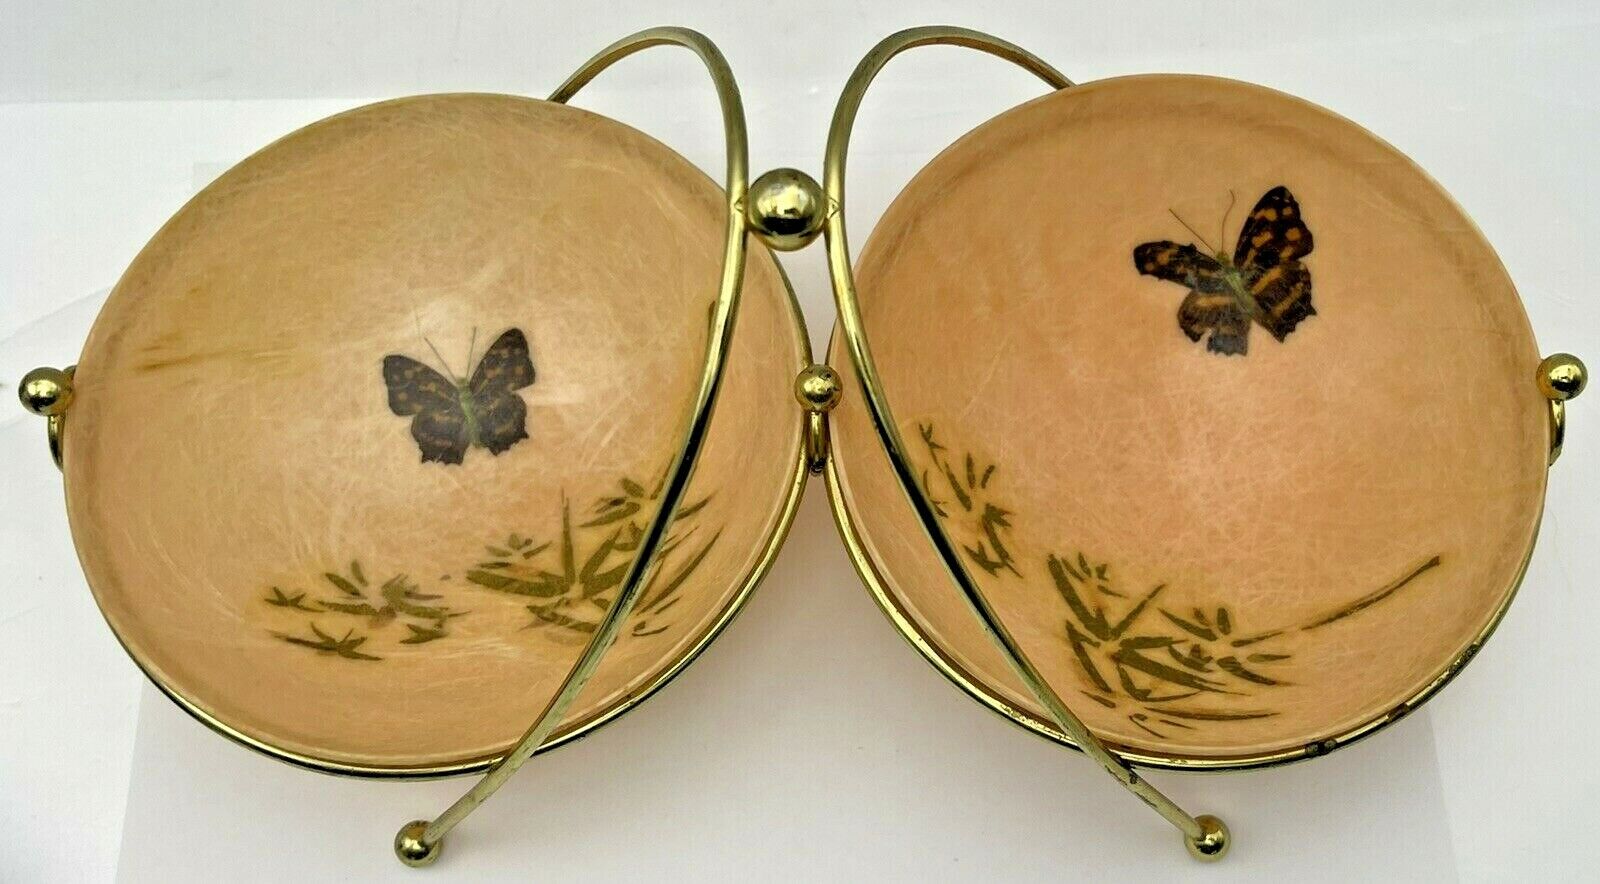 Kimball Vesta Vintage Fiberglass Butterfly Bamboo Serving Bowls in Stand MCM